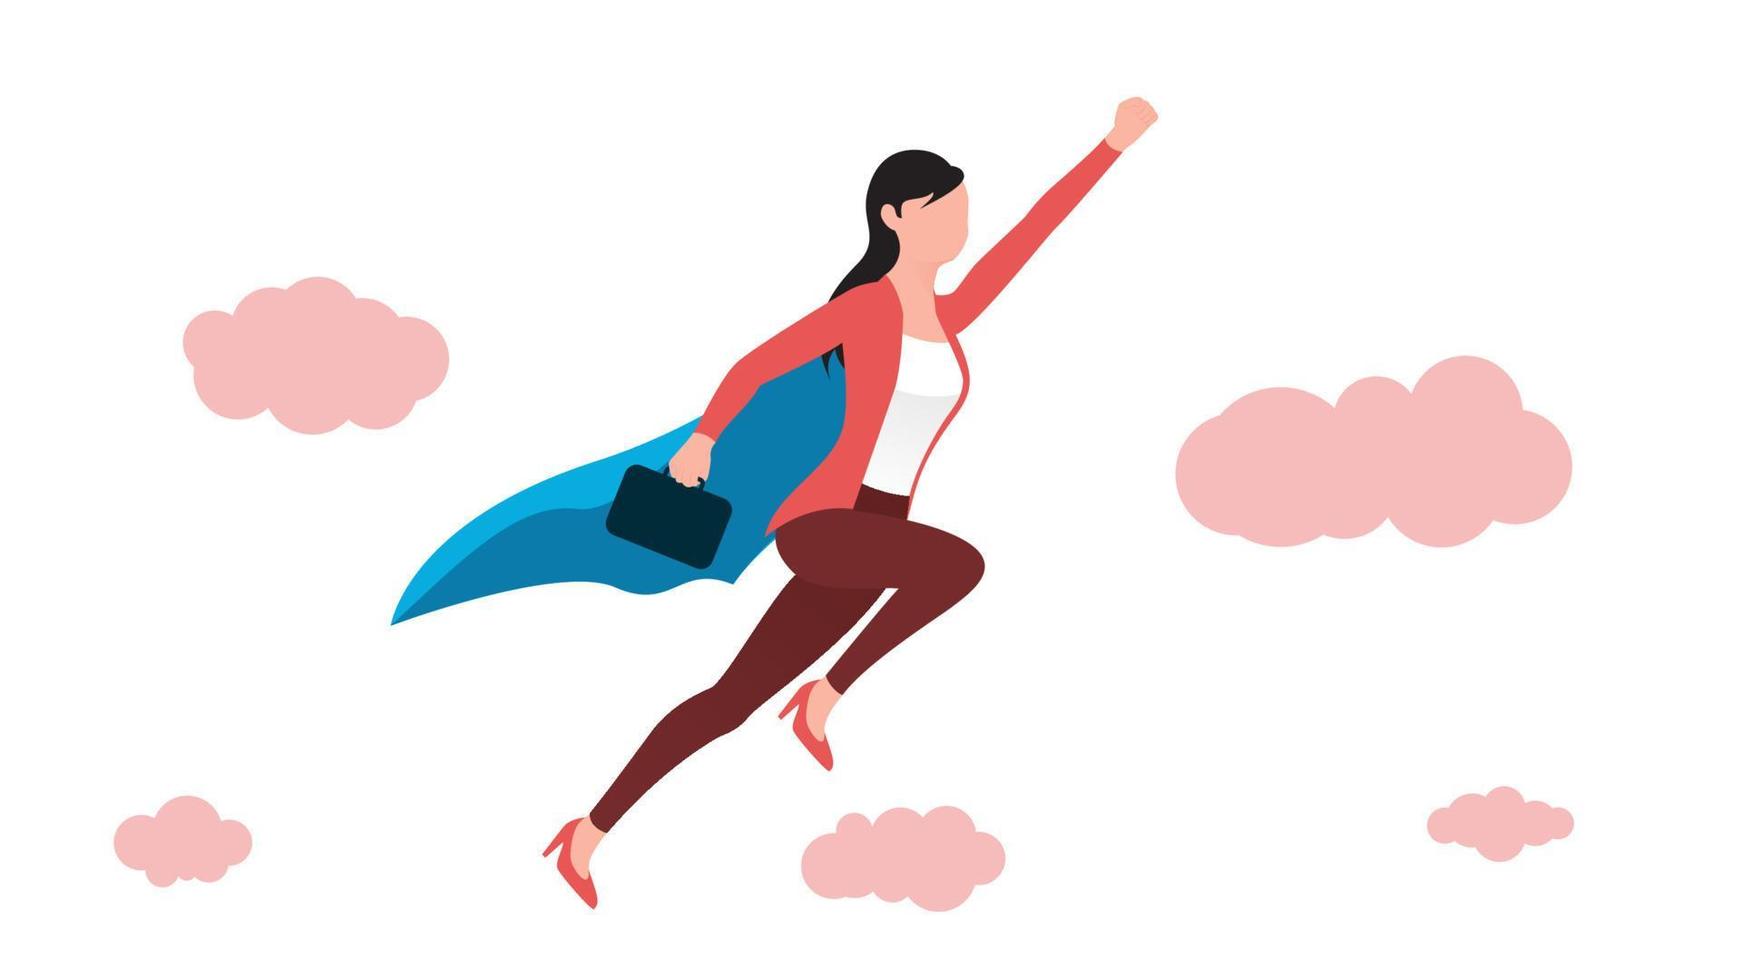 woman flying in superhero pose with briefcase, business character vector illustration on white background.